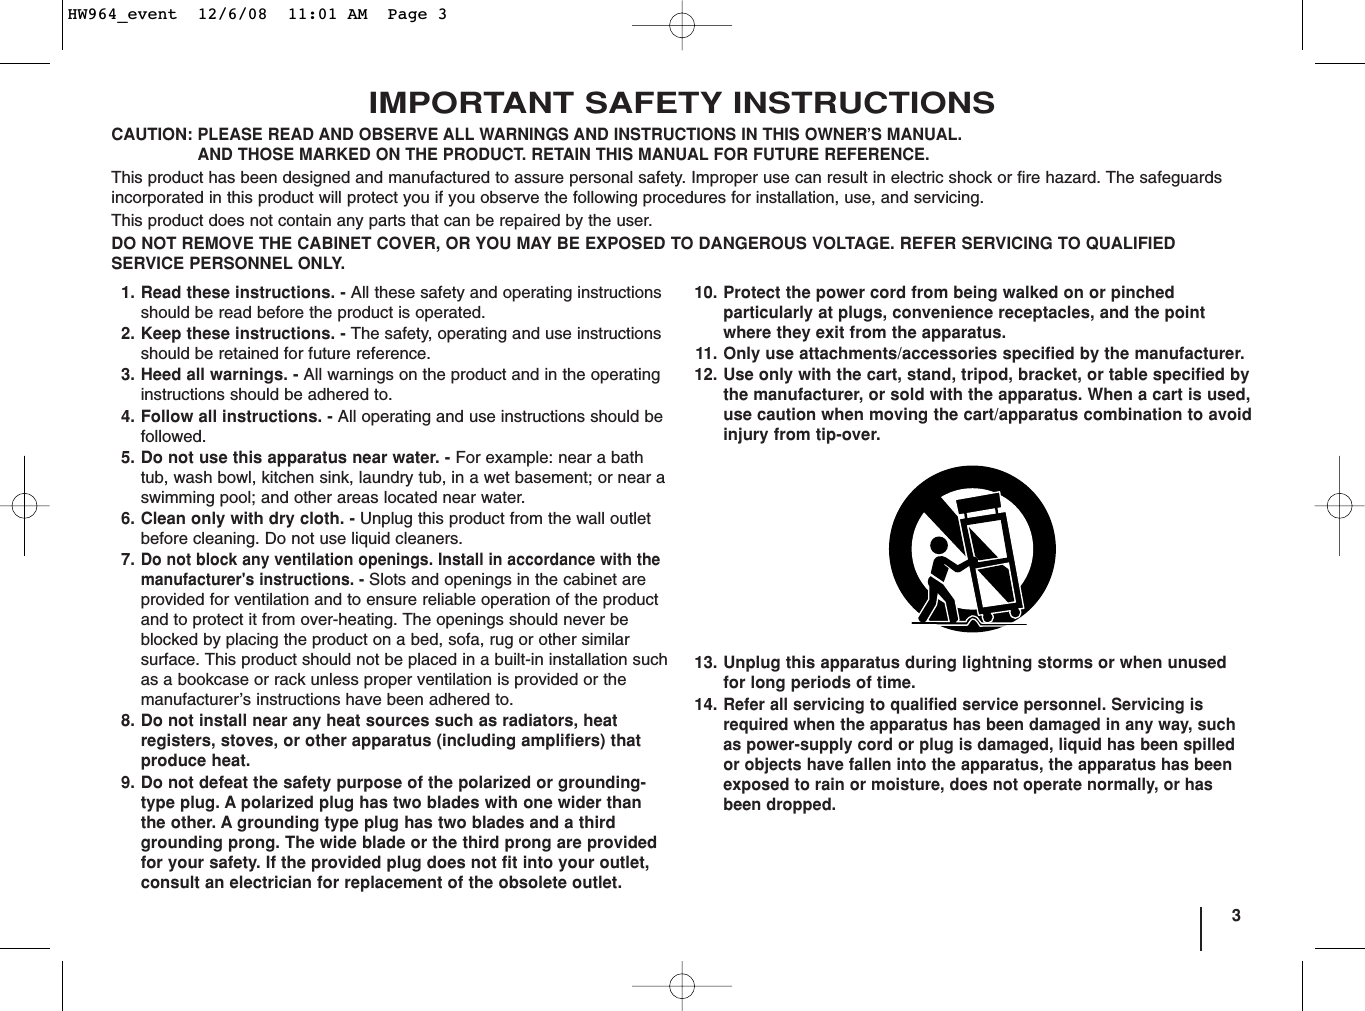 3IMPORTANT SAFETY INSTRUCTIONSCAUTION:PLEASE READ AND OBSERVE ALL WARNINGS AND INSTRUCTIONS IN THIS OWNER’S MANUAL. AND THOSE MARKED ON THE PRODUCT. RETAIN THIS MANUAL FOR FUTURE REFERENCE.This product has been designed and manufactured to assure personal safety. Improper use can result in electric shock or fire hazard. The safeguardsincorporated in this product will protect you if you observe the following procedures for installation, use, and servicing.This product does not contain any parts that can be repaired by the user.DO NOT REMOVE THE CABINET COVER, OR YOU MAY BE EXPOSED TO DANGEROUS VOLTAGE. REFER SERVICING TO QUALIFIEDSERVICE PERSONNEL ONLY.1. Read these instructions. - All these safety and operating instructionsshould be read before the product is operated.2. Keep these instructions. - The safety, operating and use instructionsshould be retained for future reference.3. Heed all warnings. - All warnings on the product and in the operatinginstructions should be adhered to.4. Follow all instructions. - All operating and use instructions should befollowed.5. Do not use this apparatus near water. - For example: near a bathtub, wash bowl, kitchen sink, laundry tub, in a wet basement; or near aswimming pool; and other areas located near water.6. Clean only with dry cloth. - Unplug this product from the wall outletbefore cleaning. Do not use liquid cleaners.7.Do not block any ventilation openings. Install in accordance with themanufacturer&apos;s instructions. - Slots and openings in the cabinet areprovided for ventilation and to ensure reliable operation of the productand to protect it from over-heating. The openings should never beblocked by placing the product on a bed, sofa, rug or other similarsurface. This product should not be placed in a built-in installation suchas a bookcase or rack unless proper ventilation is provided or themanufacturer’s instructions have been adhered to.8. Do not install near any heat sources such as radiators, heat registers, stoves, or other apparatus (including amplifiers) thatproduce heat. 9. Do not defeat the safety purpose of the polarized or grounding-type plug. A polarized plug has two blades with one wider thanthe other. A grounding type plug has two blades and a thirdgrounding prong. The wide blade or the third prong are providedfor your safety. If the provided plug does not fit into your outlet,consult an electrician for replacement of the obsolete outlet.10. Protect the power cord from being walked on or pinchedparticularly at plugs, convenience receptacles, and the pointwhere they exit from the apparatus.11. Only use attachments/accessories specified by the manufacturer.12. Use only with the cart, stand, tripod, bracket, or table specified bythe manufacturer, or sold with the apparatus. When a cart is used,use caution when moving the cart/apparatus combination to avoidinjury from tip-over.13. Unplug this apparatus during lightning storms or when unusedfor long periods of time.14.Refer all servicing to qualified service personnel. Servicing isrequired when the apparatus has been damaged in any way, suchas power-supply cord or plug is damaged, liquid has been spilledor objects have fallen into the apparatus, the apparatus has beenexposed to rain or moisture, does not operate normally, or hasbeen dropped.HW964_event  12/6/08  11:01 AM  Page 3